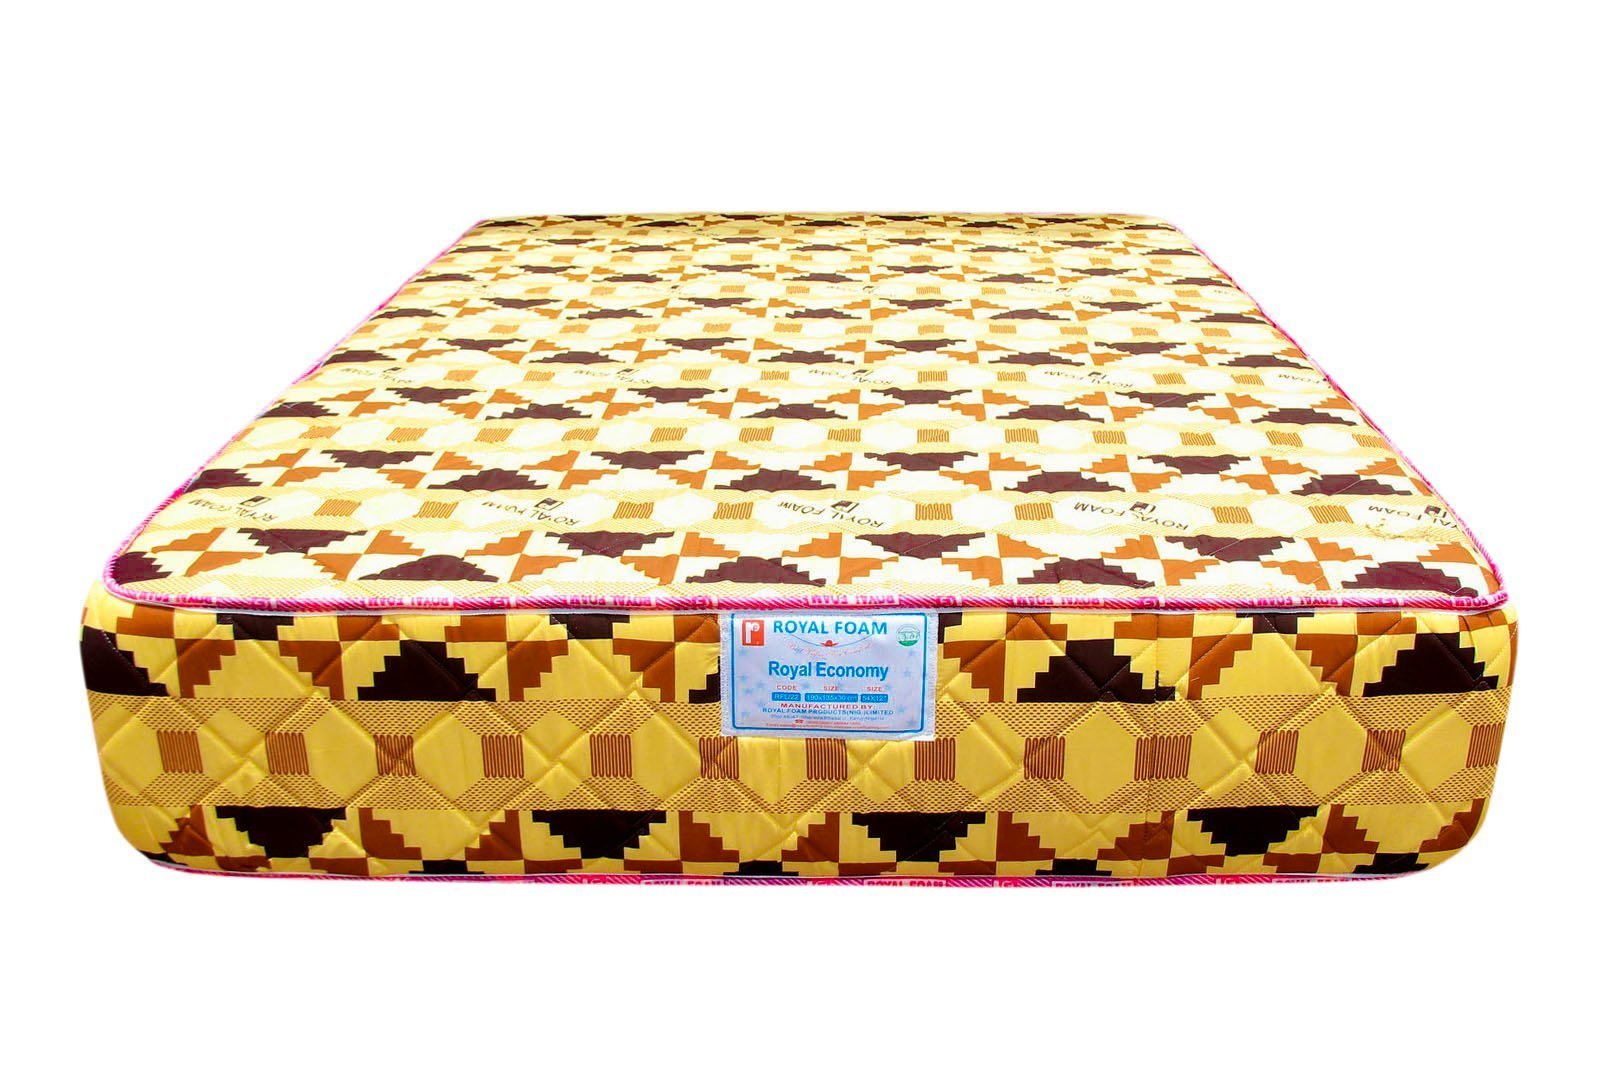 Royal Economy-Poly Cotton Fabric - Fully Quilted Mattress [75 x 54 x 18"] [6ft x 4.4ft x 18inches](Lagos Only)